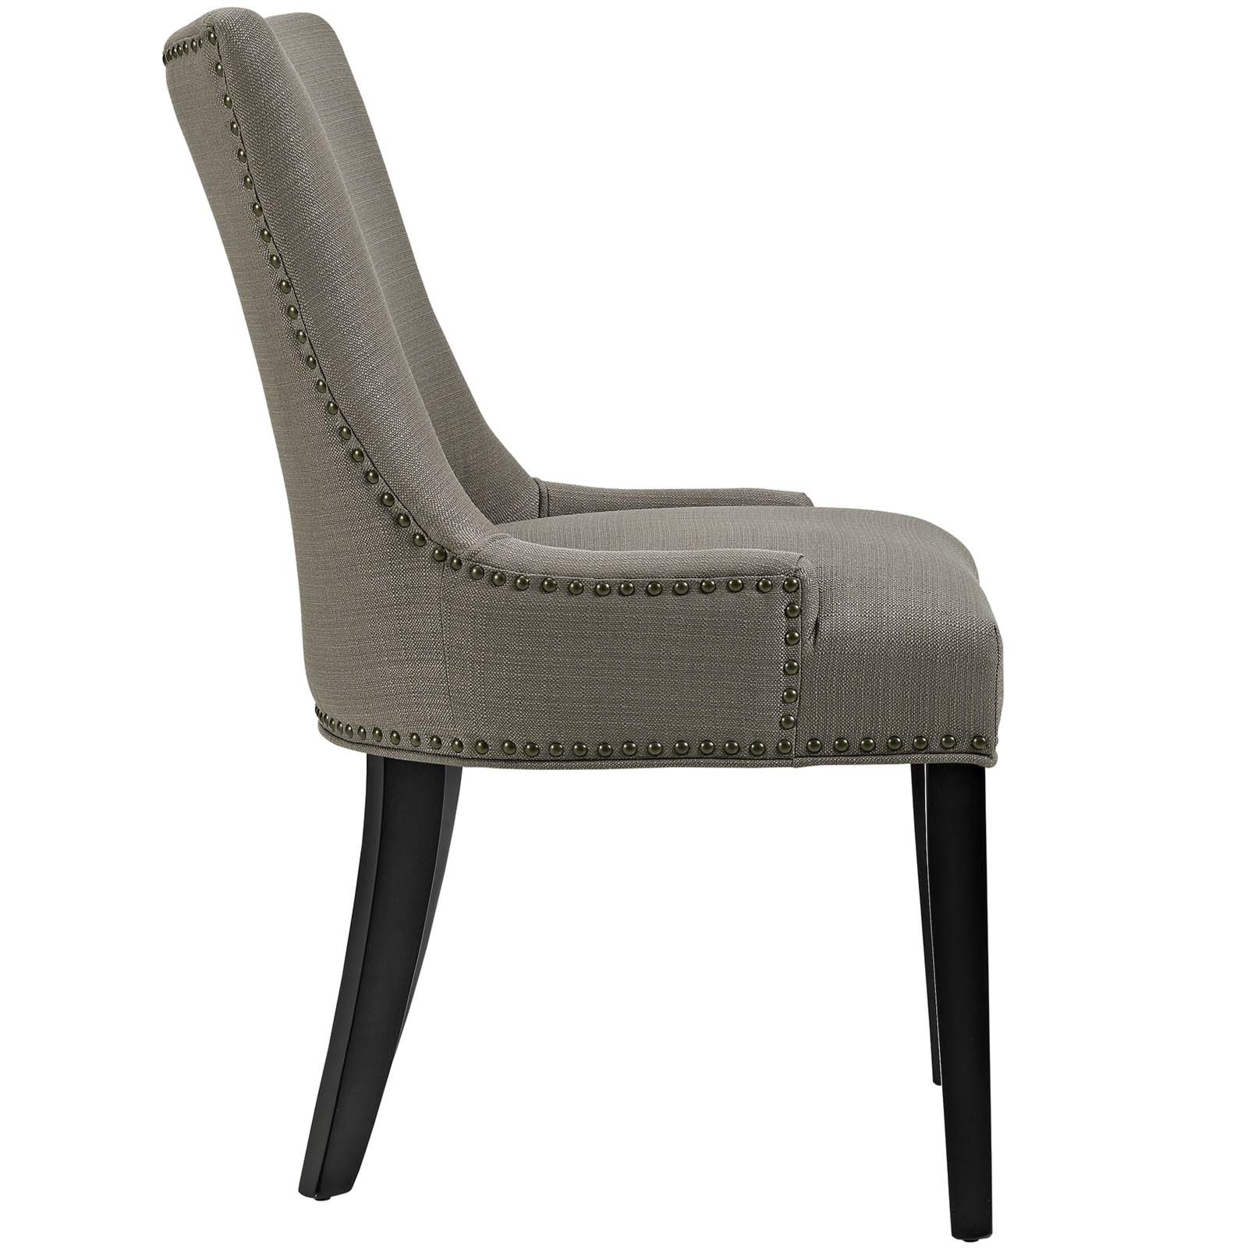 Marquis Set Of 2 Fabric Dining Side Chair, Granite